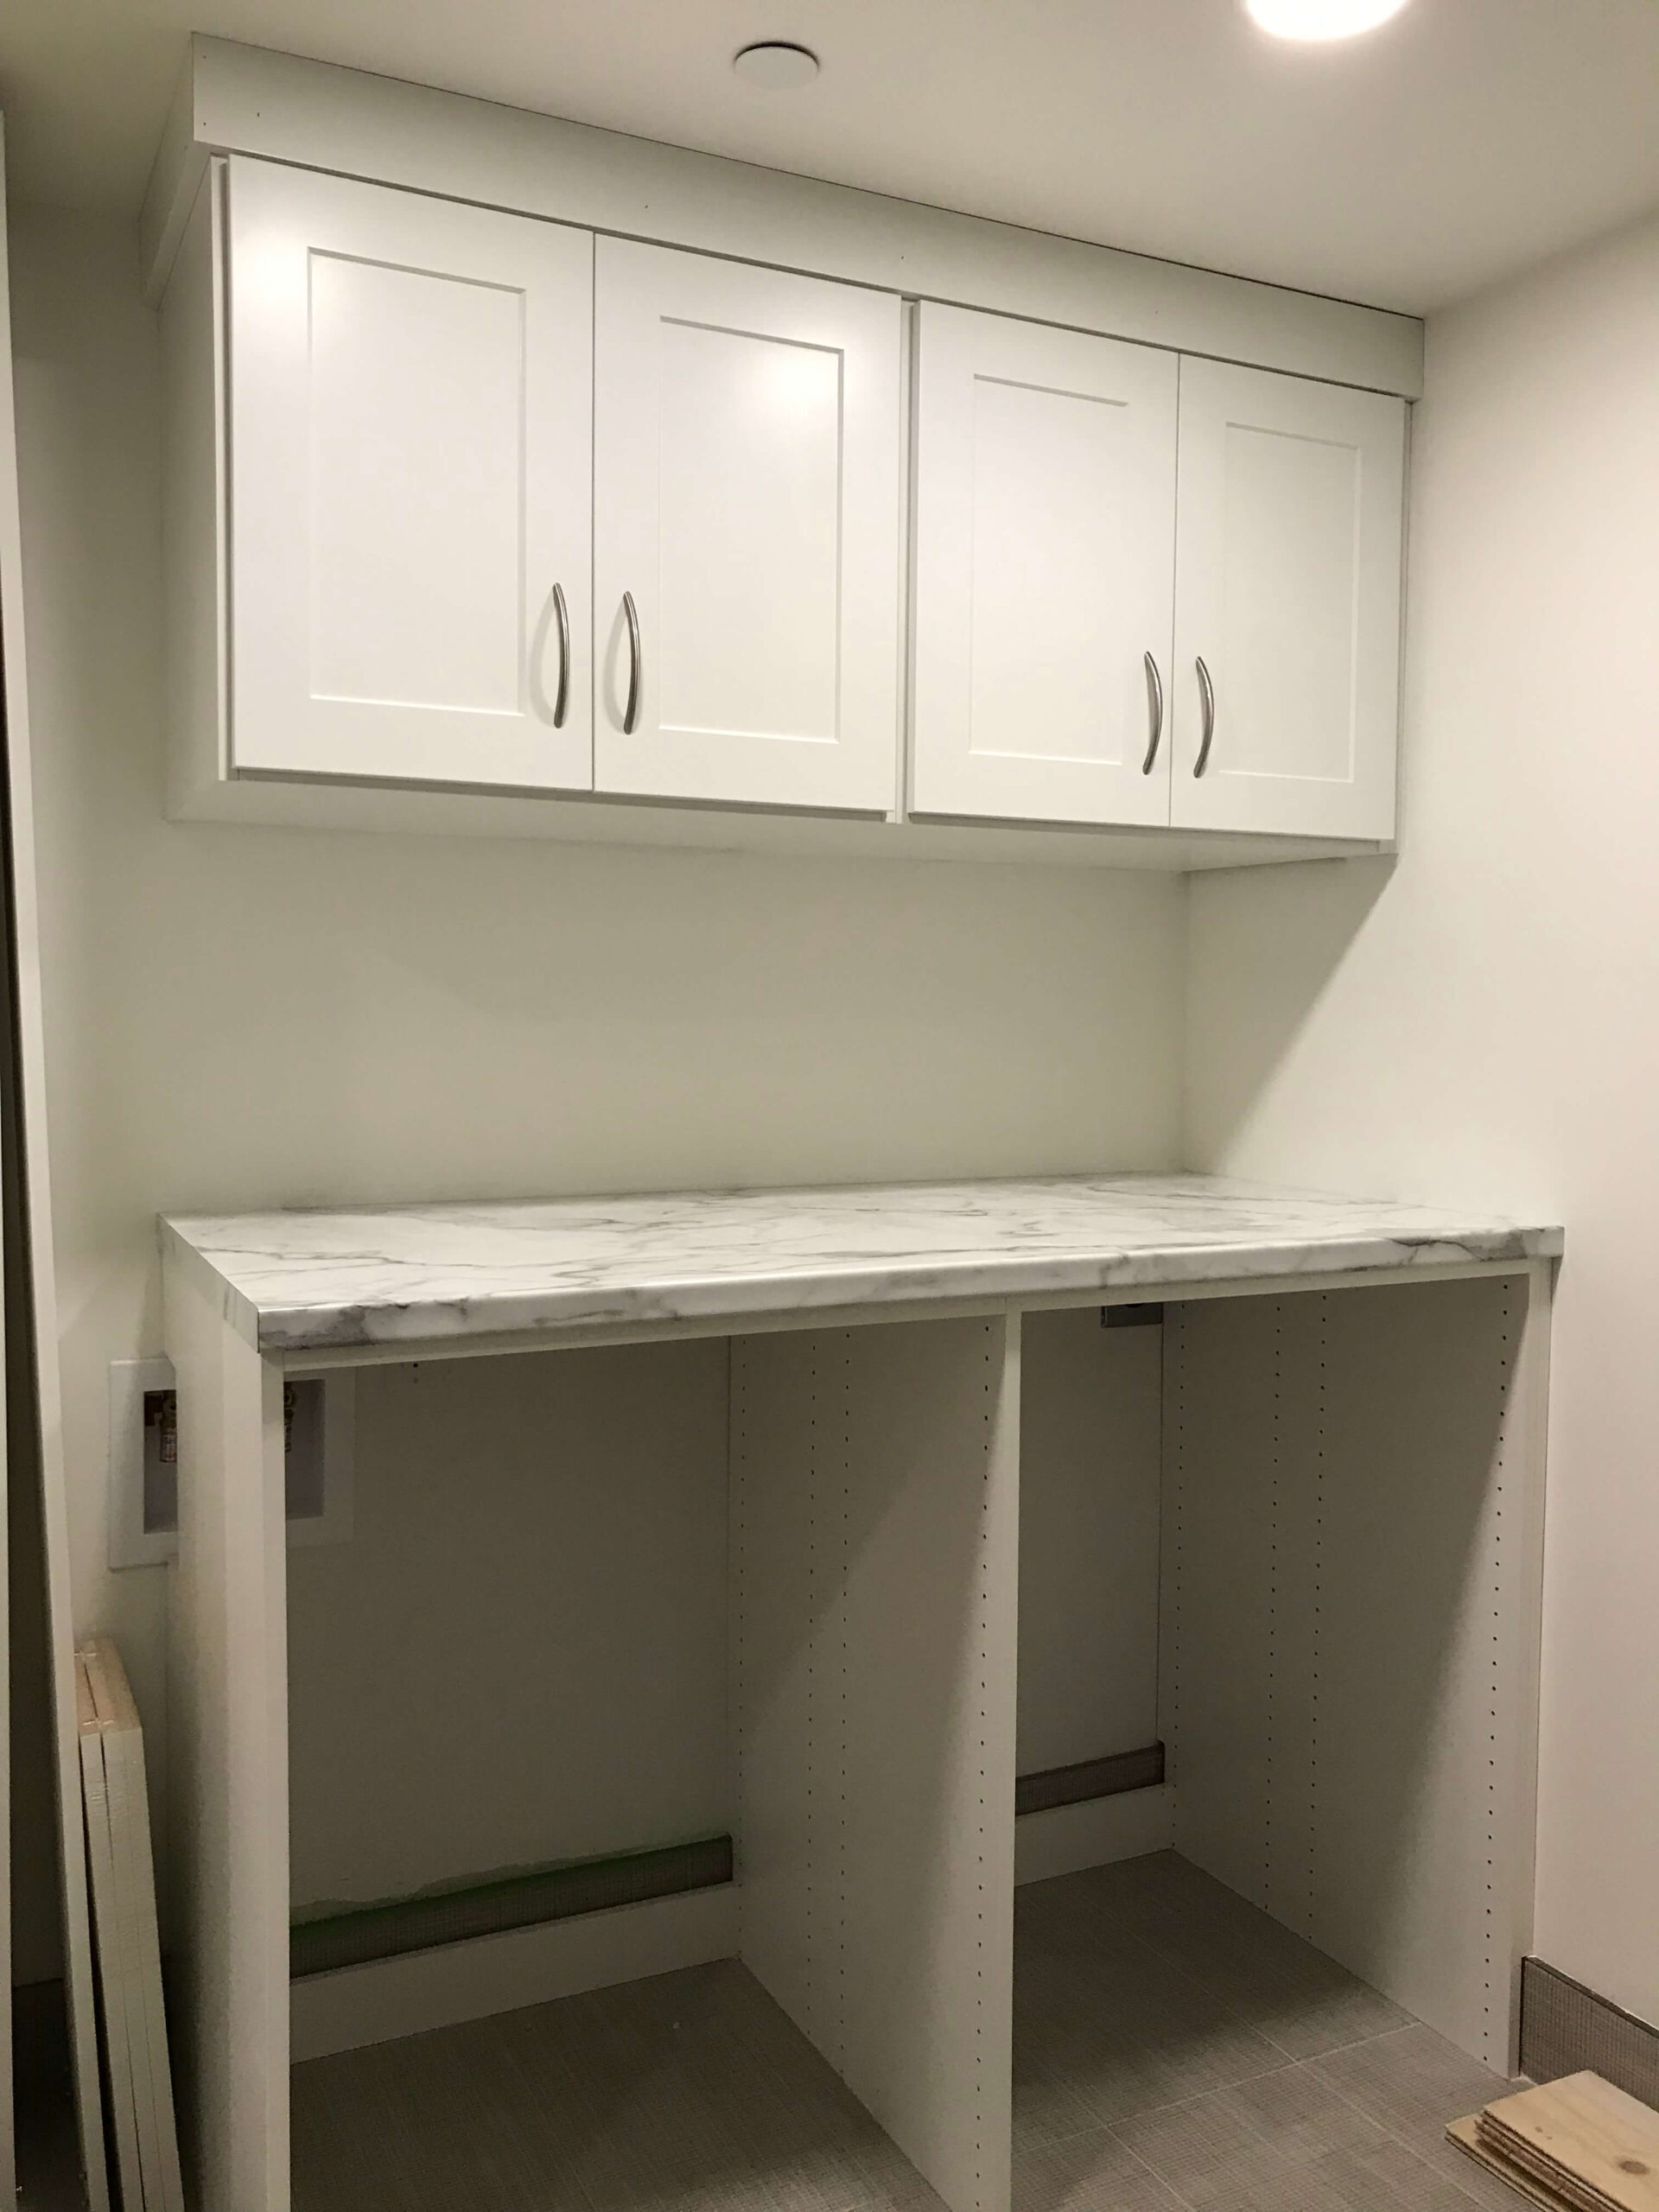 Laundry Room Organization in Sioux Falls, SD